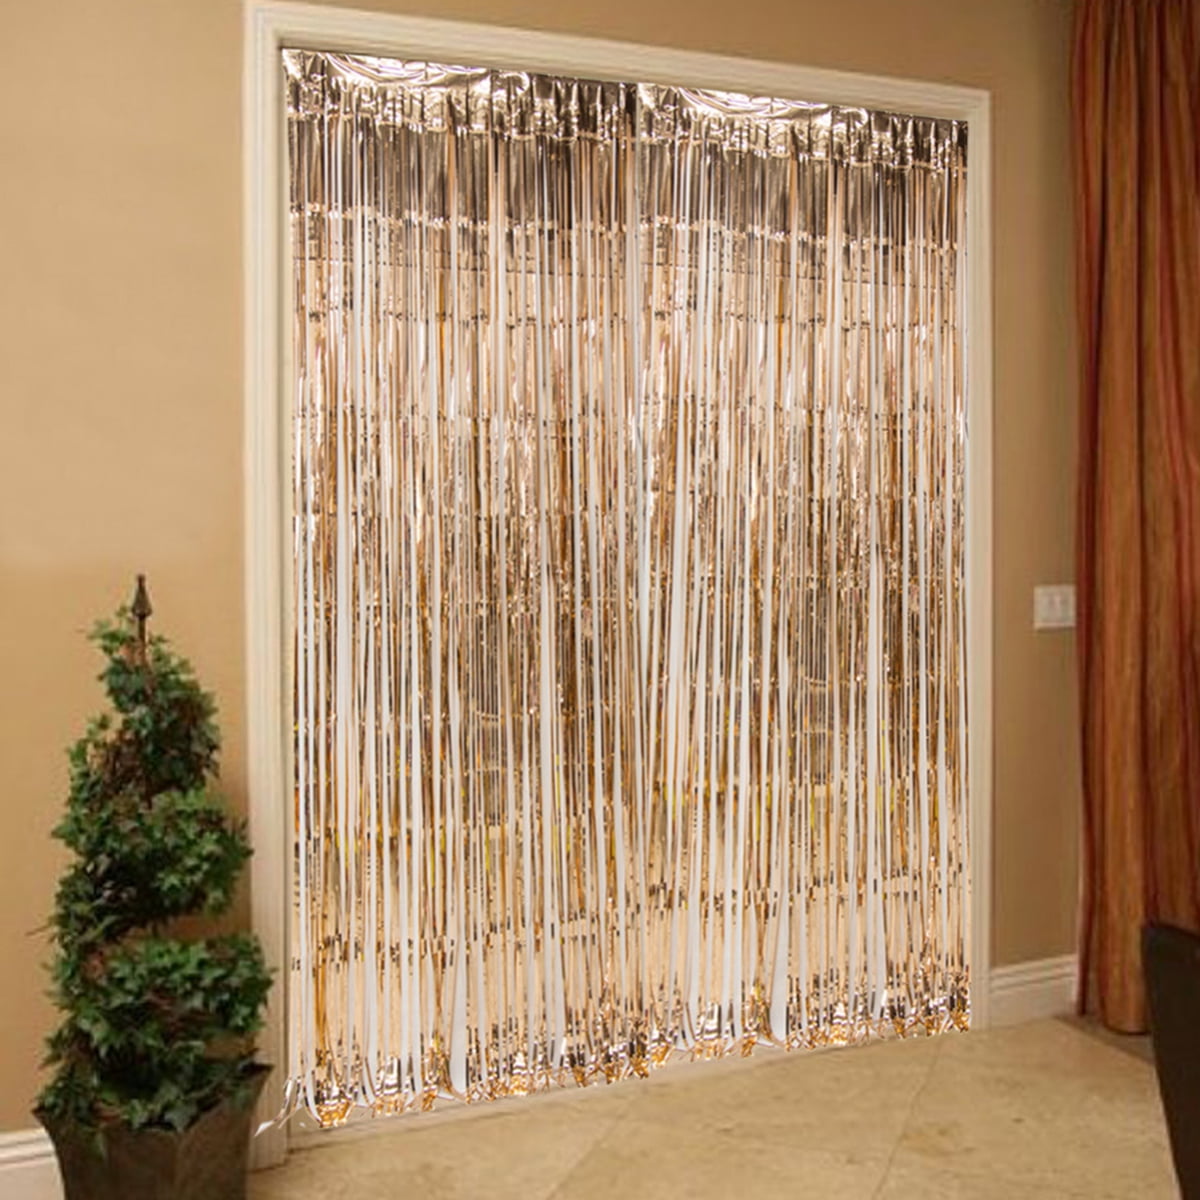 Streamer Backdrop Birthday Wedding Party Door Windows Decorations 1m x 2m Foil Curtains 4 Pack Metallic Tinsel Curtains Rose Gold Tinsel Backdrop for Rose Gold Party Decoration 